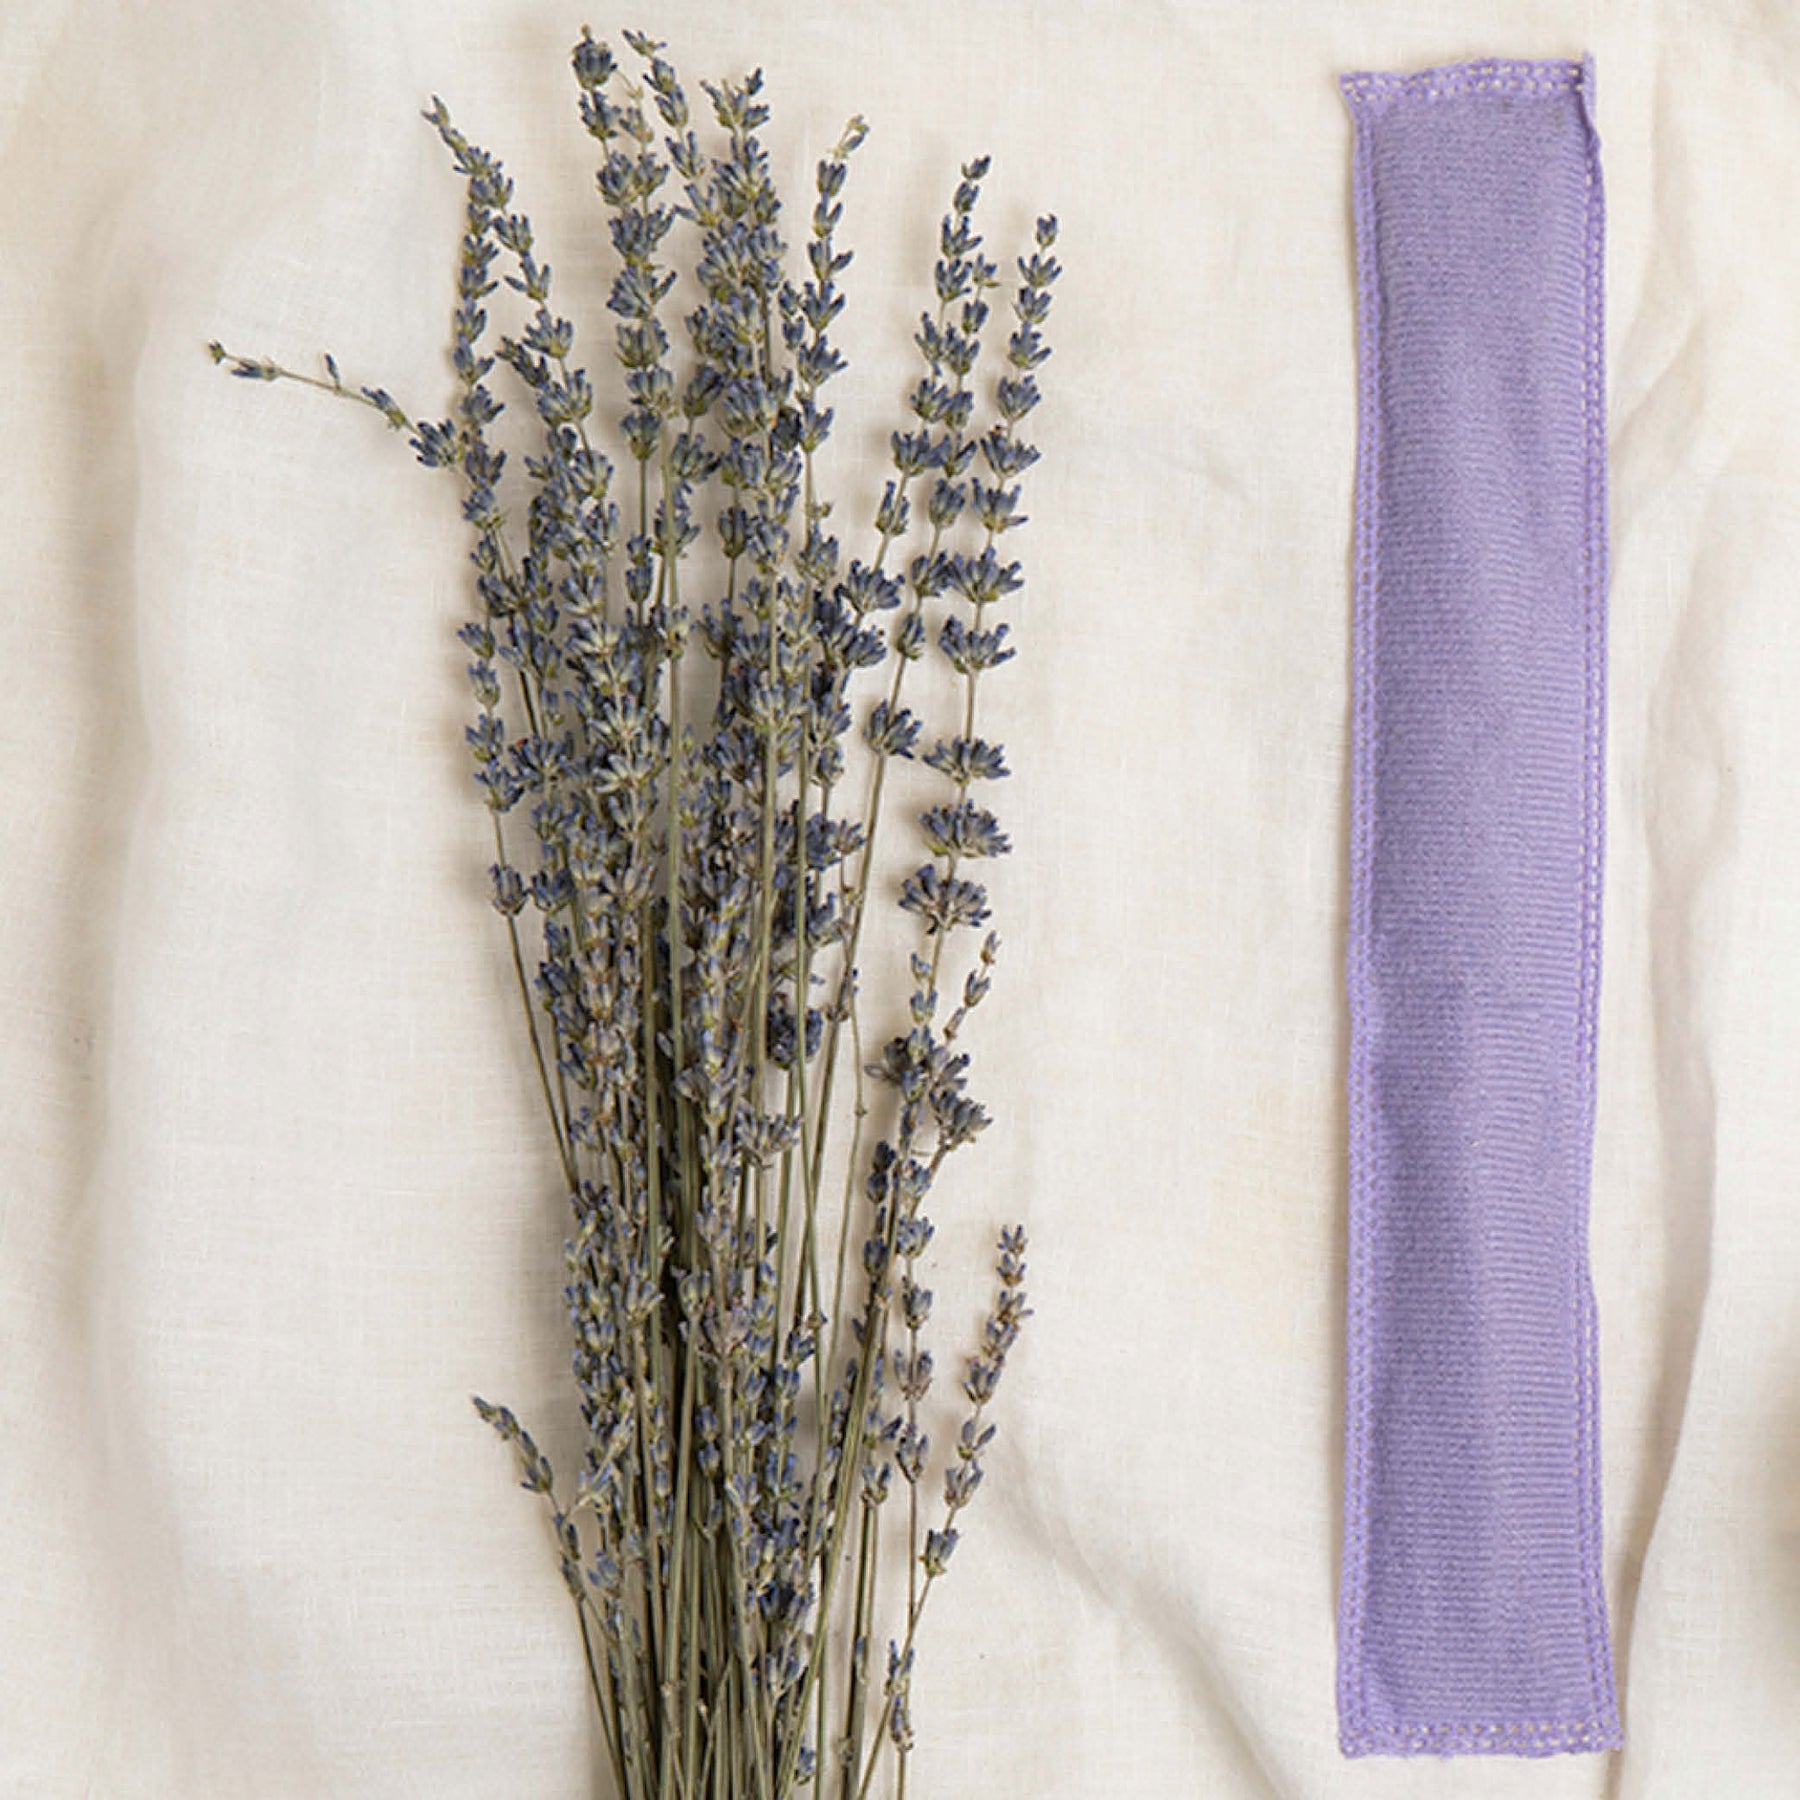 Image of a purple Aromatherapy sachet with lavender sprigs to the left of it on an off-white fabric background